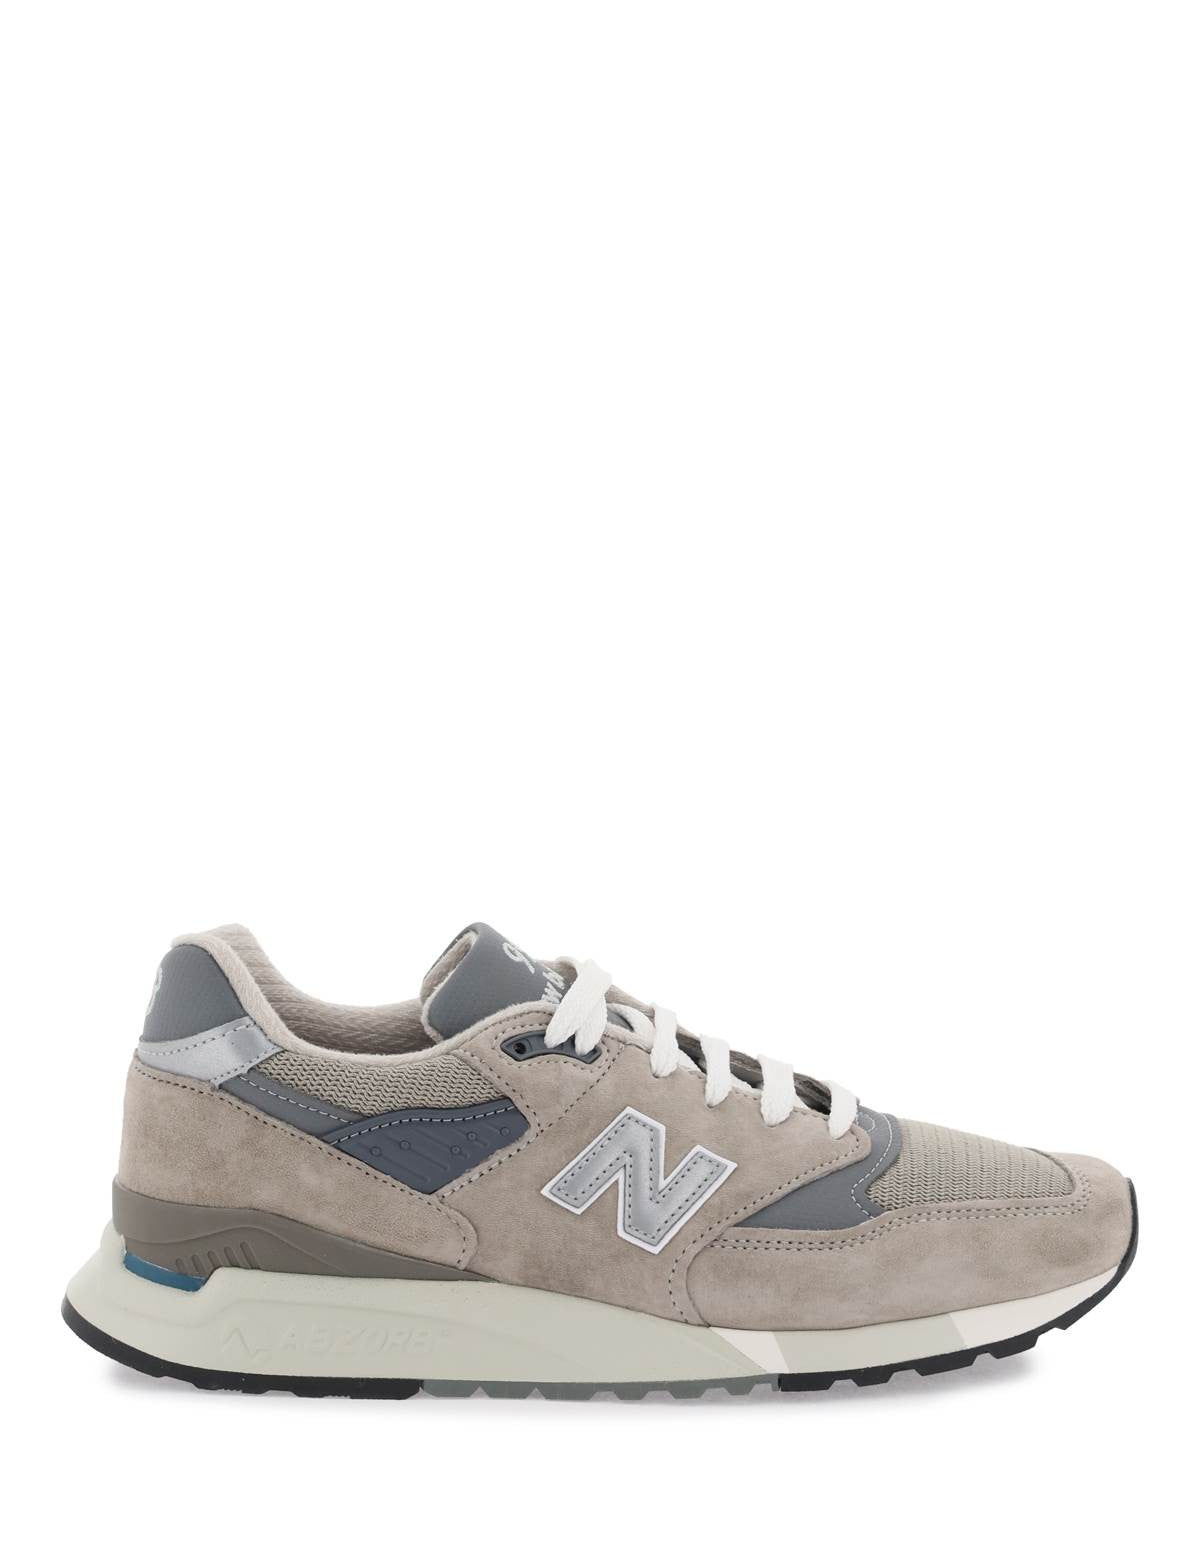 new-balance-made-in-usa-998-core-sneakers.jpg